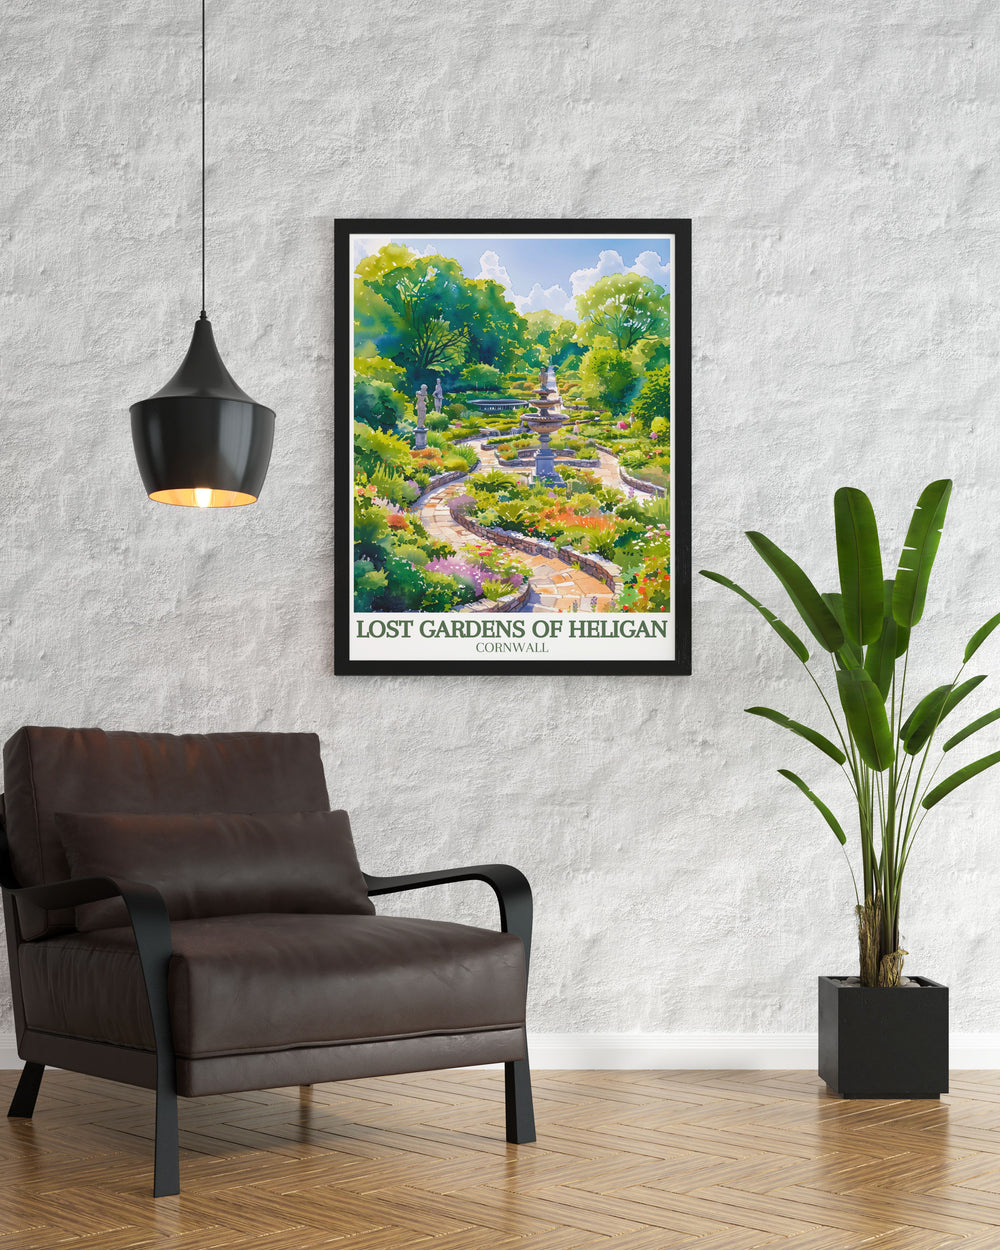 Beautiful Eden Project Print showcasing the iconic structures and tropical biomes of Cornwall with intricate details also includes Italian garden Productive gardens for a touch of botanical splendor